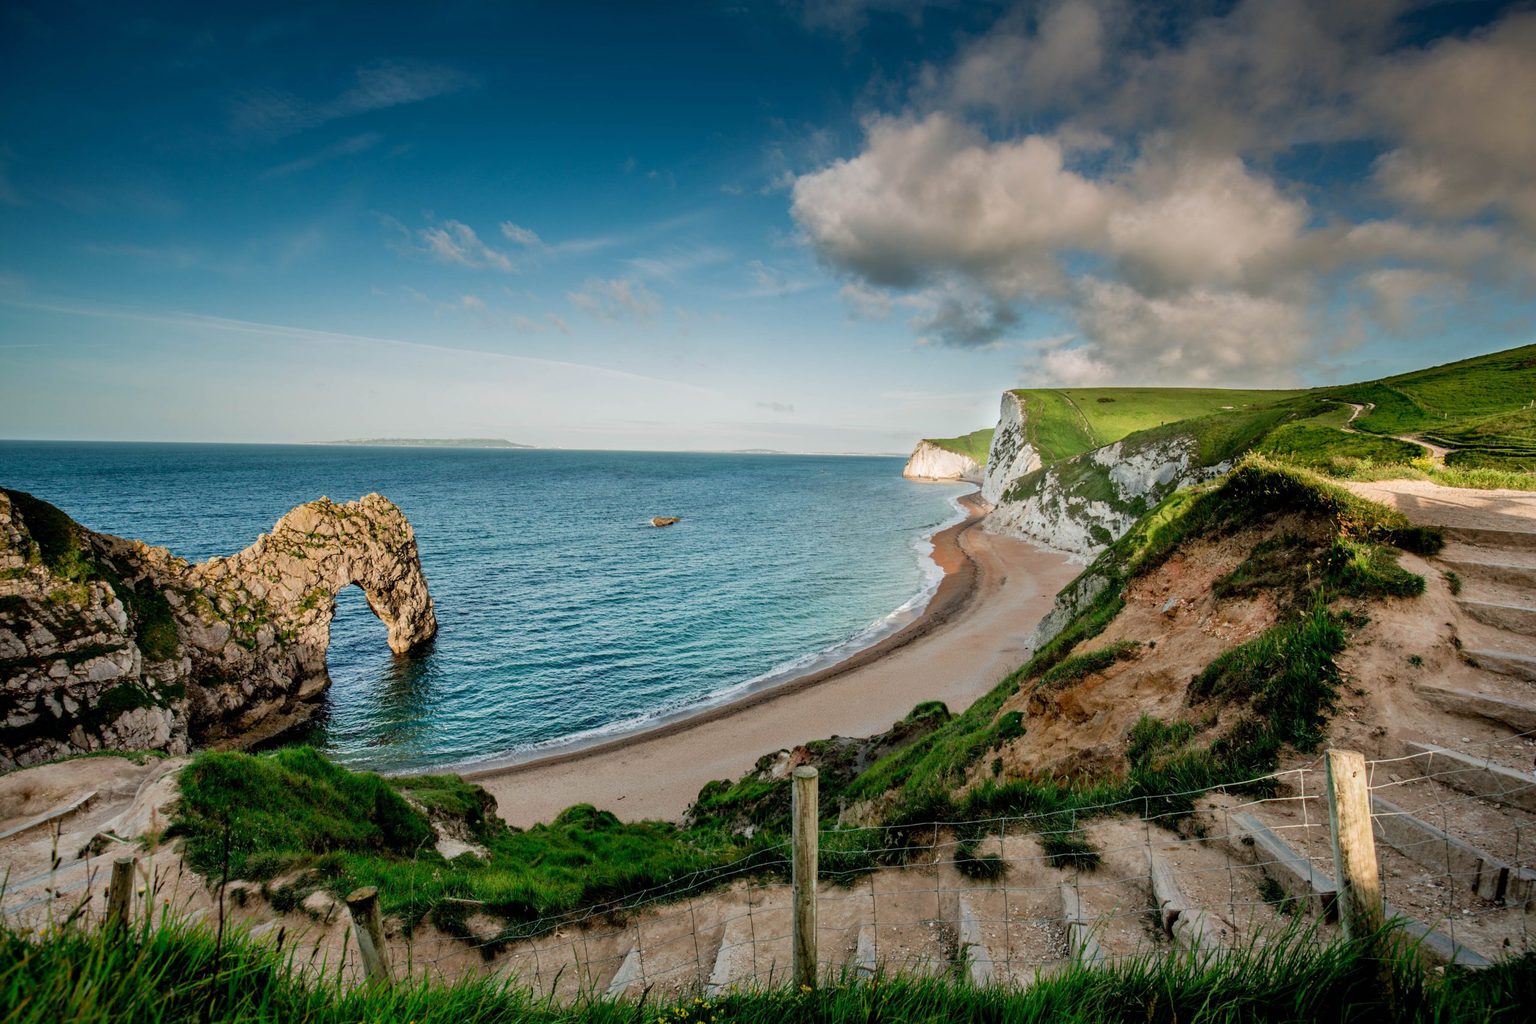 A set of stone and wood steps leading down towards a curved bay with a small shingle beach and the rock arch of Durdle Door over the sea at the left end on a sunny day with blue sea and blue sky overhead